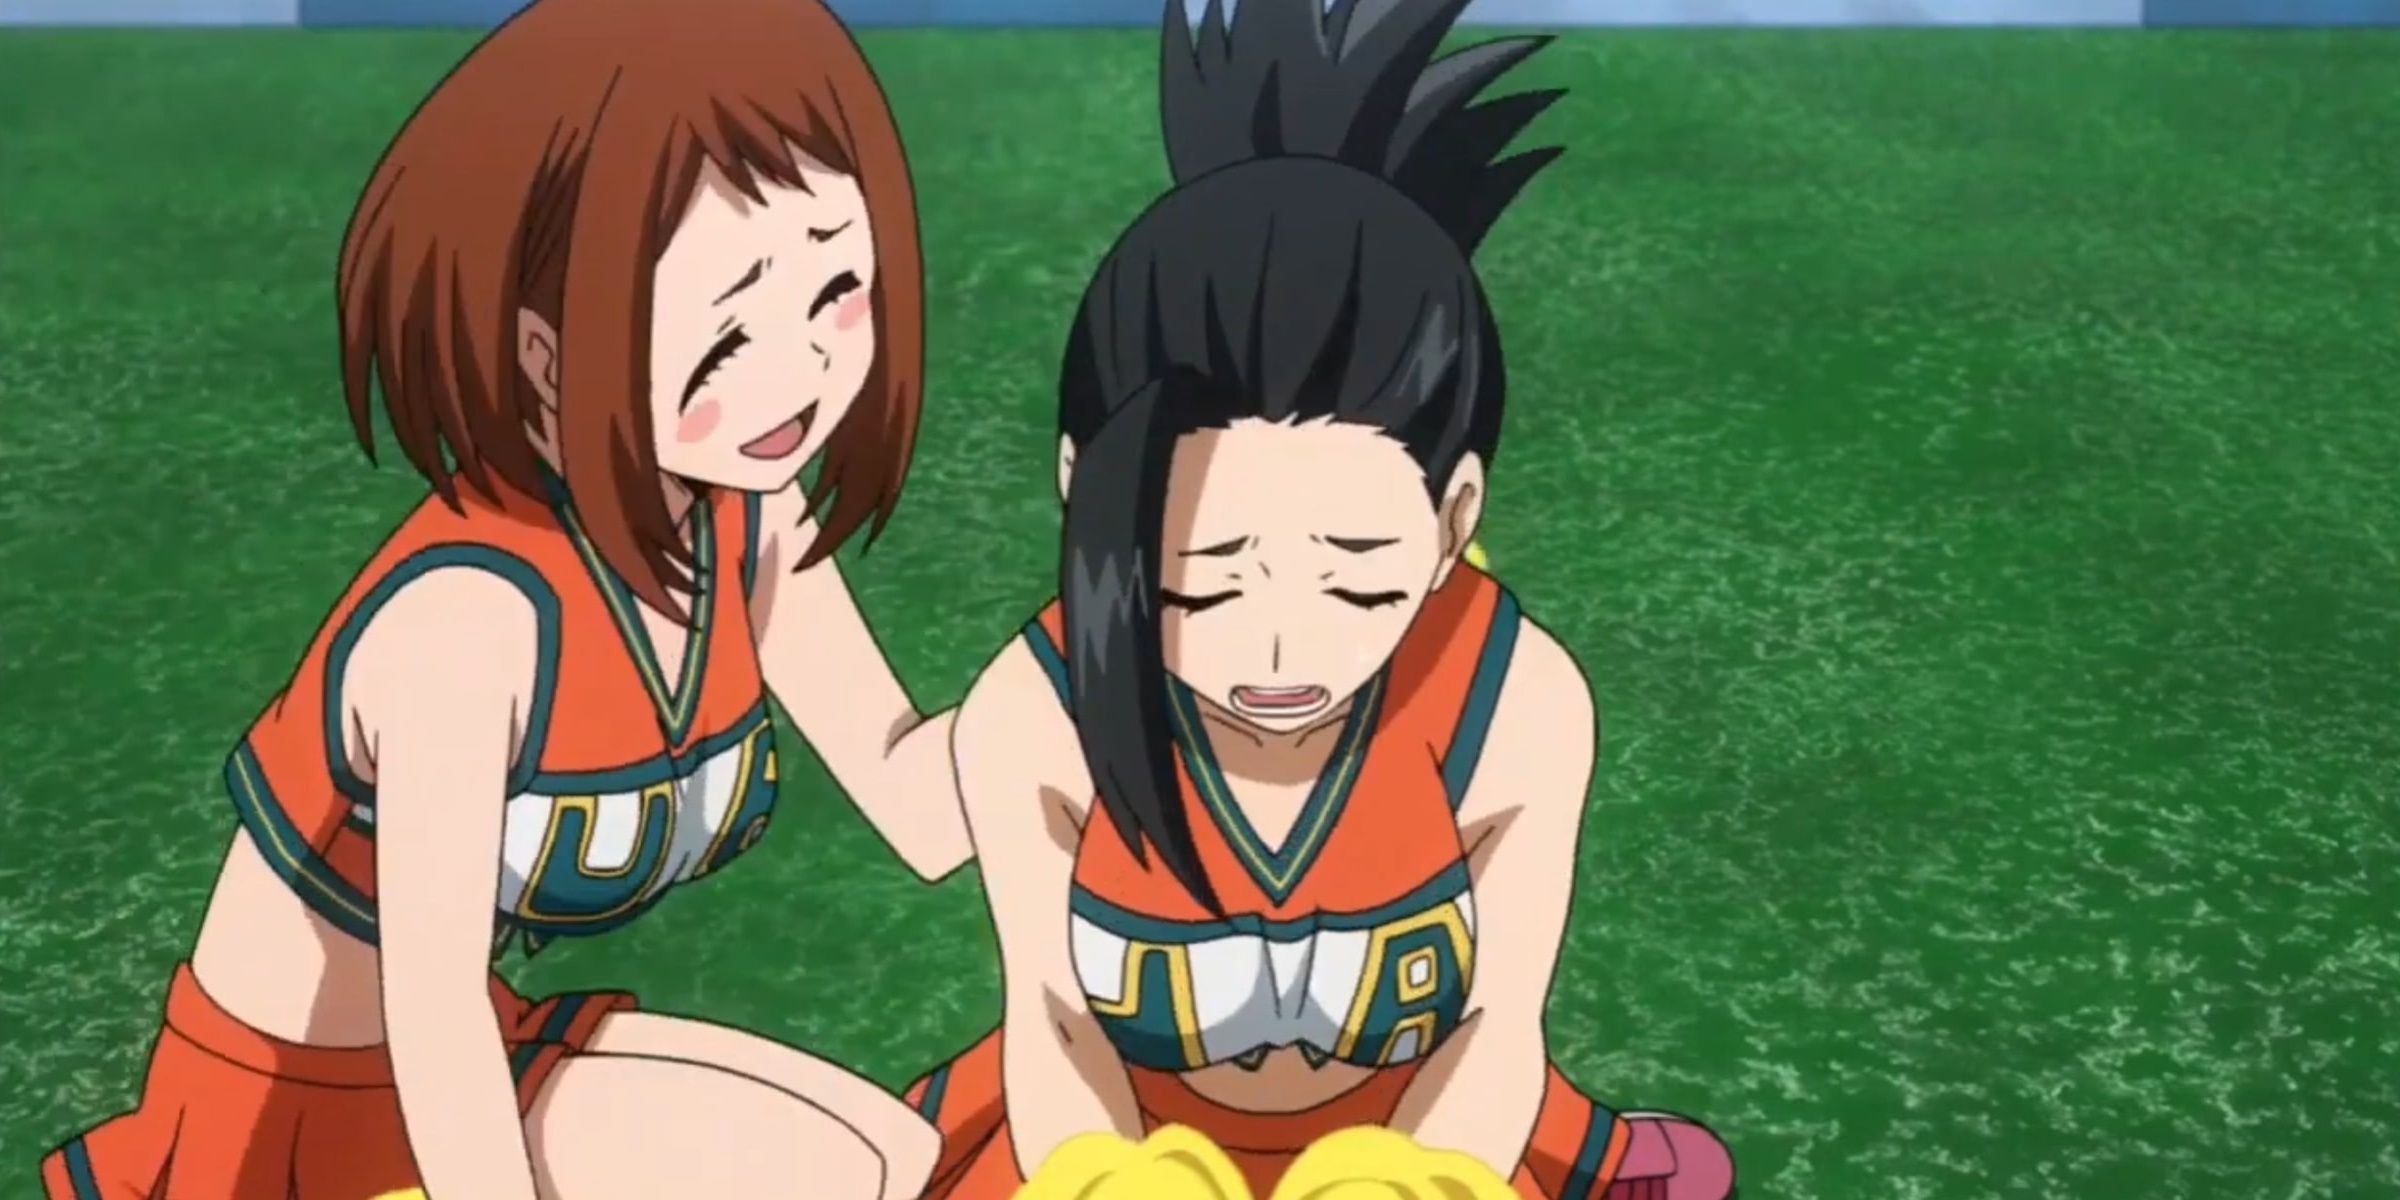 Momo Pouts In Cheer Leader Outfit In My Hero Academia.